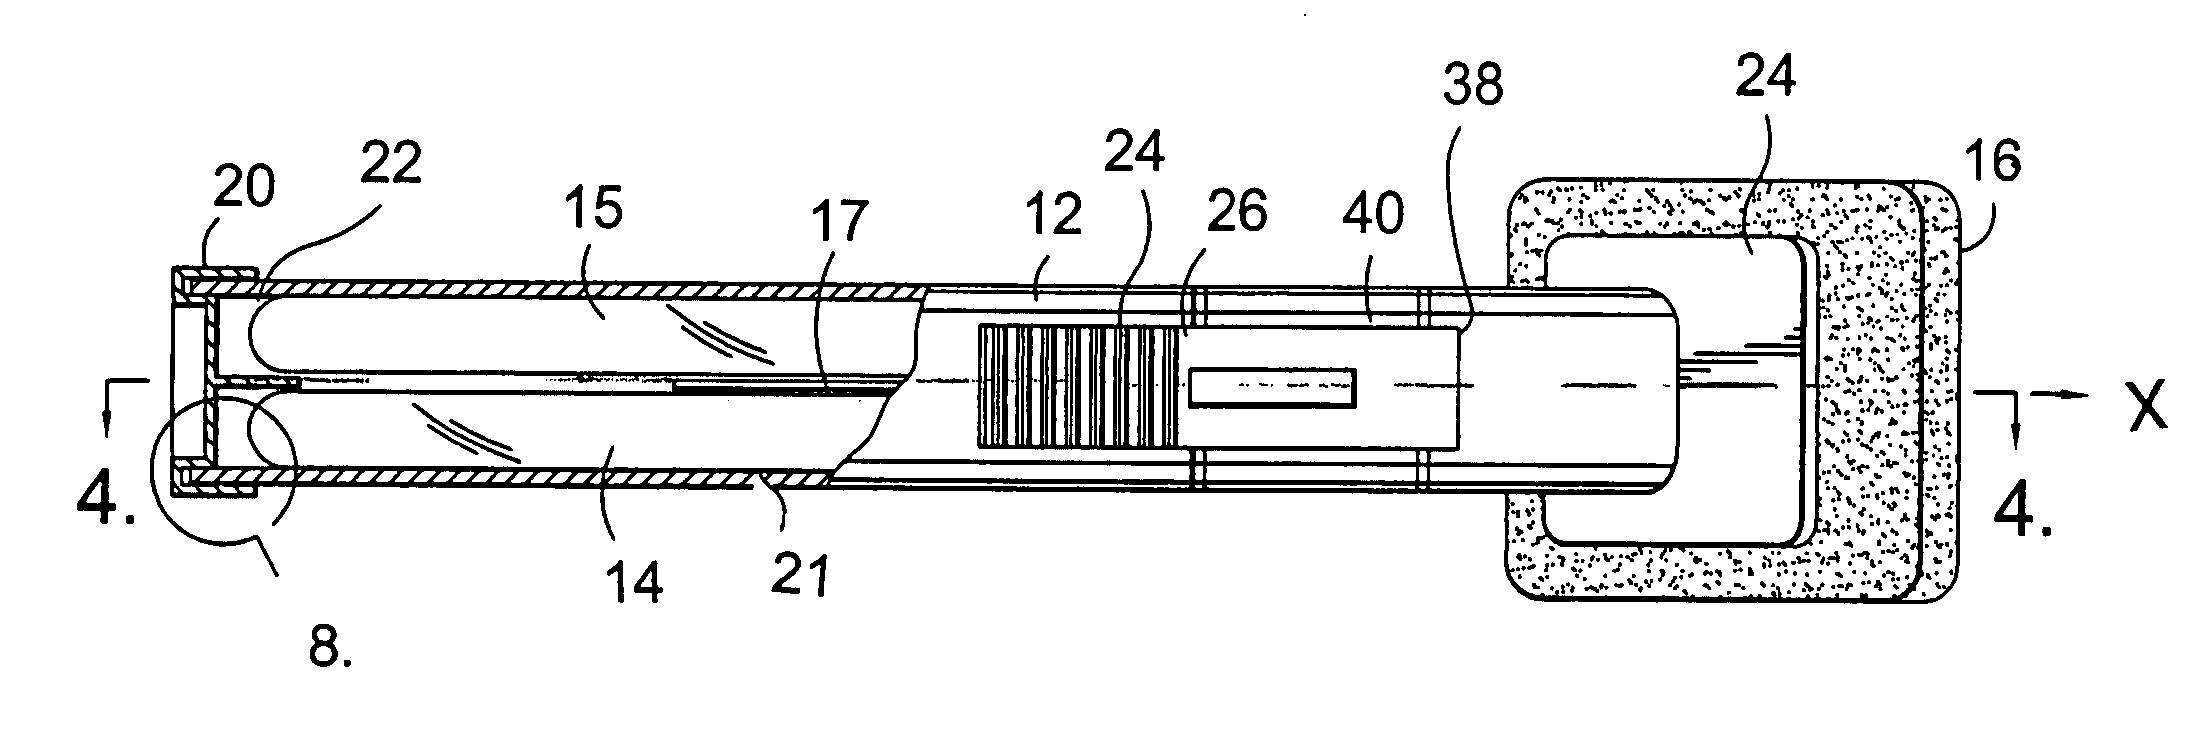 Liquid applicator with a mechanism for fracturing multiple ampoules